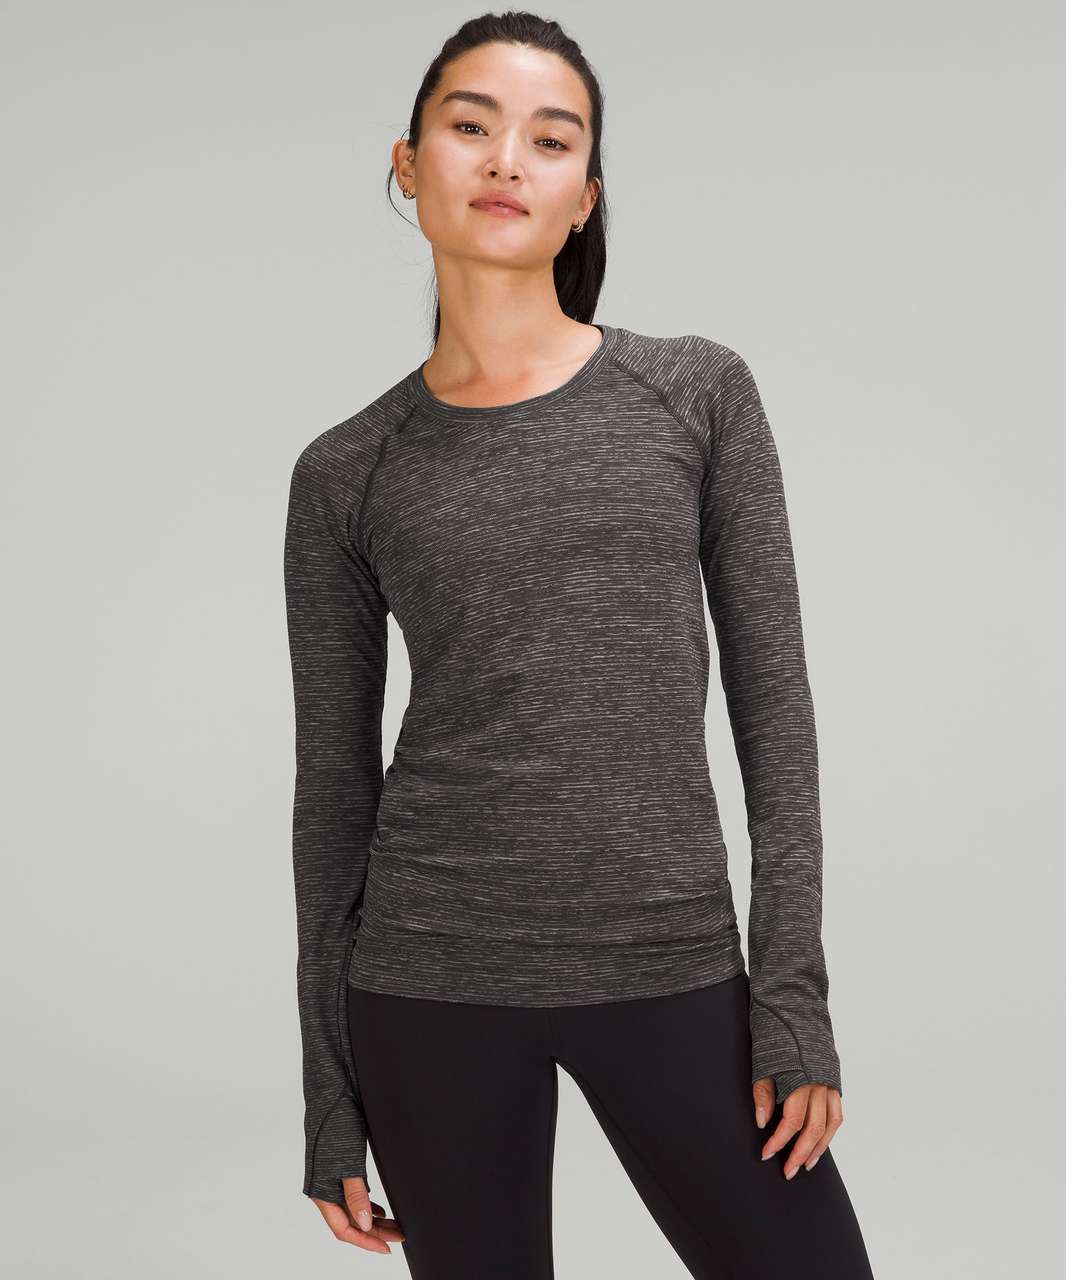 Lululemon Swiftly Tech Long Sleeve Shirt 2.0 - Wee Are From Space Graphite Grey